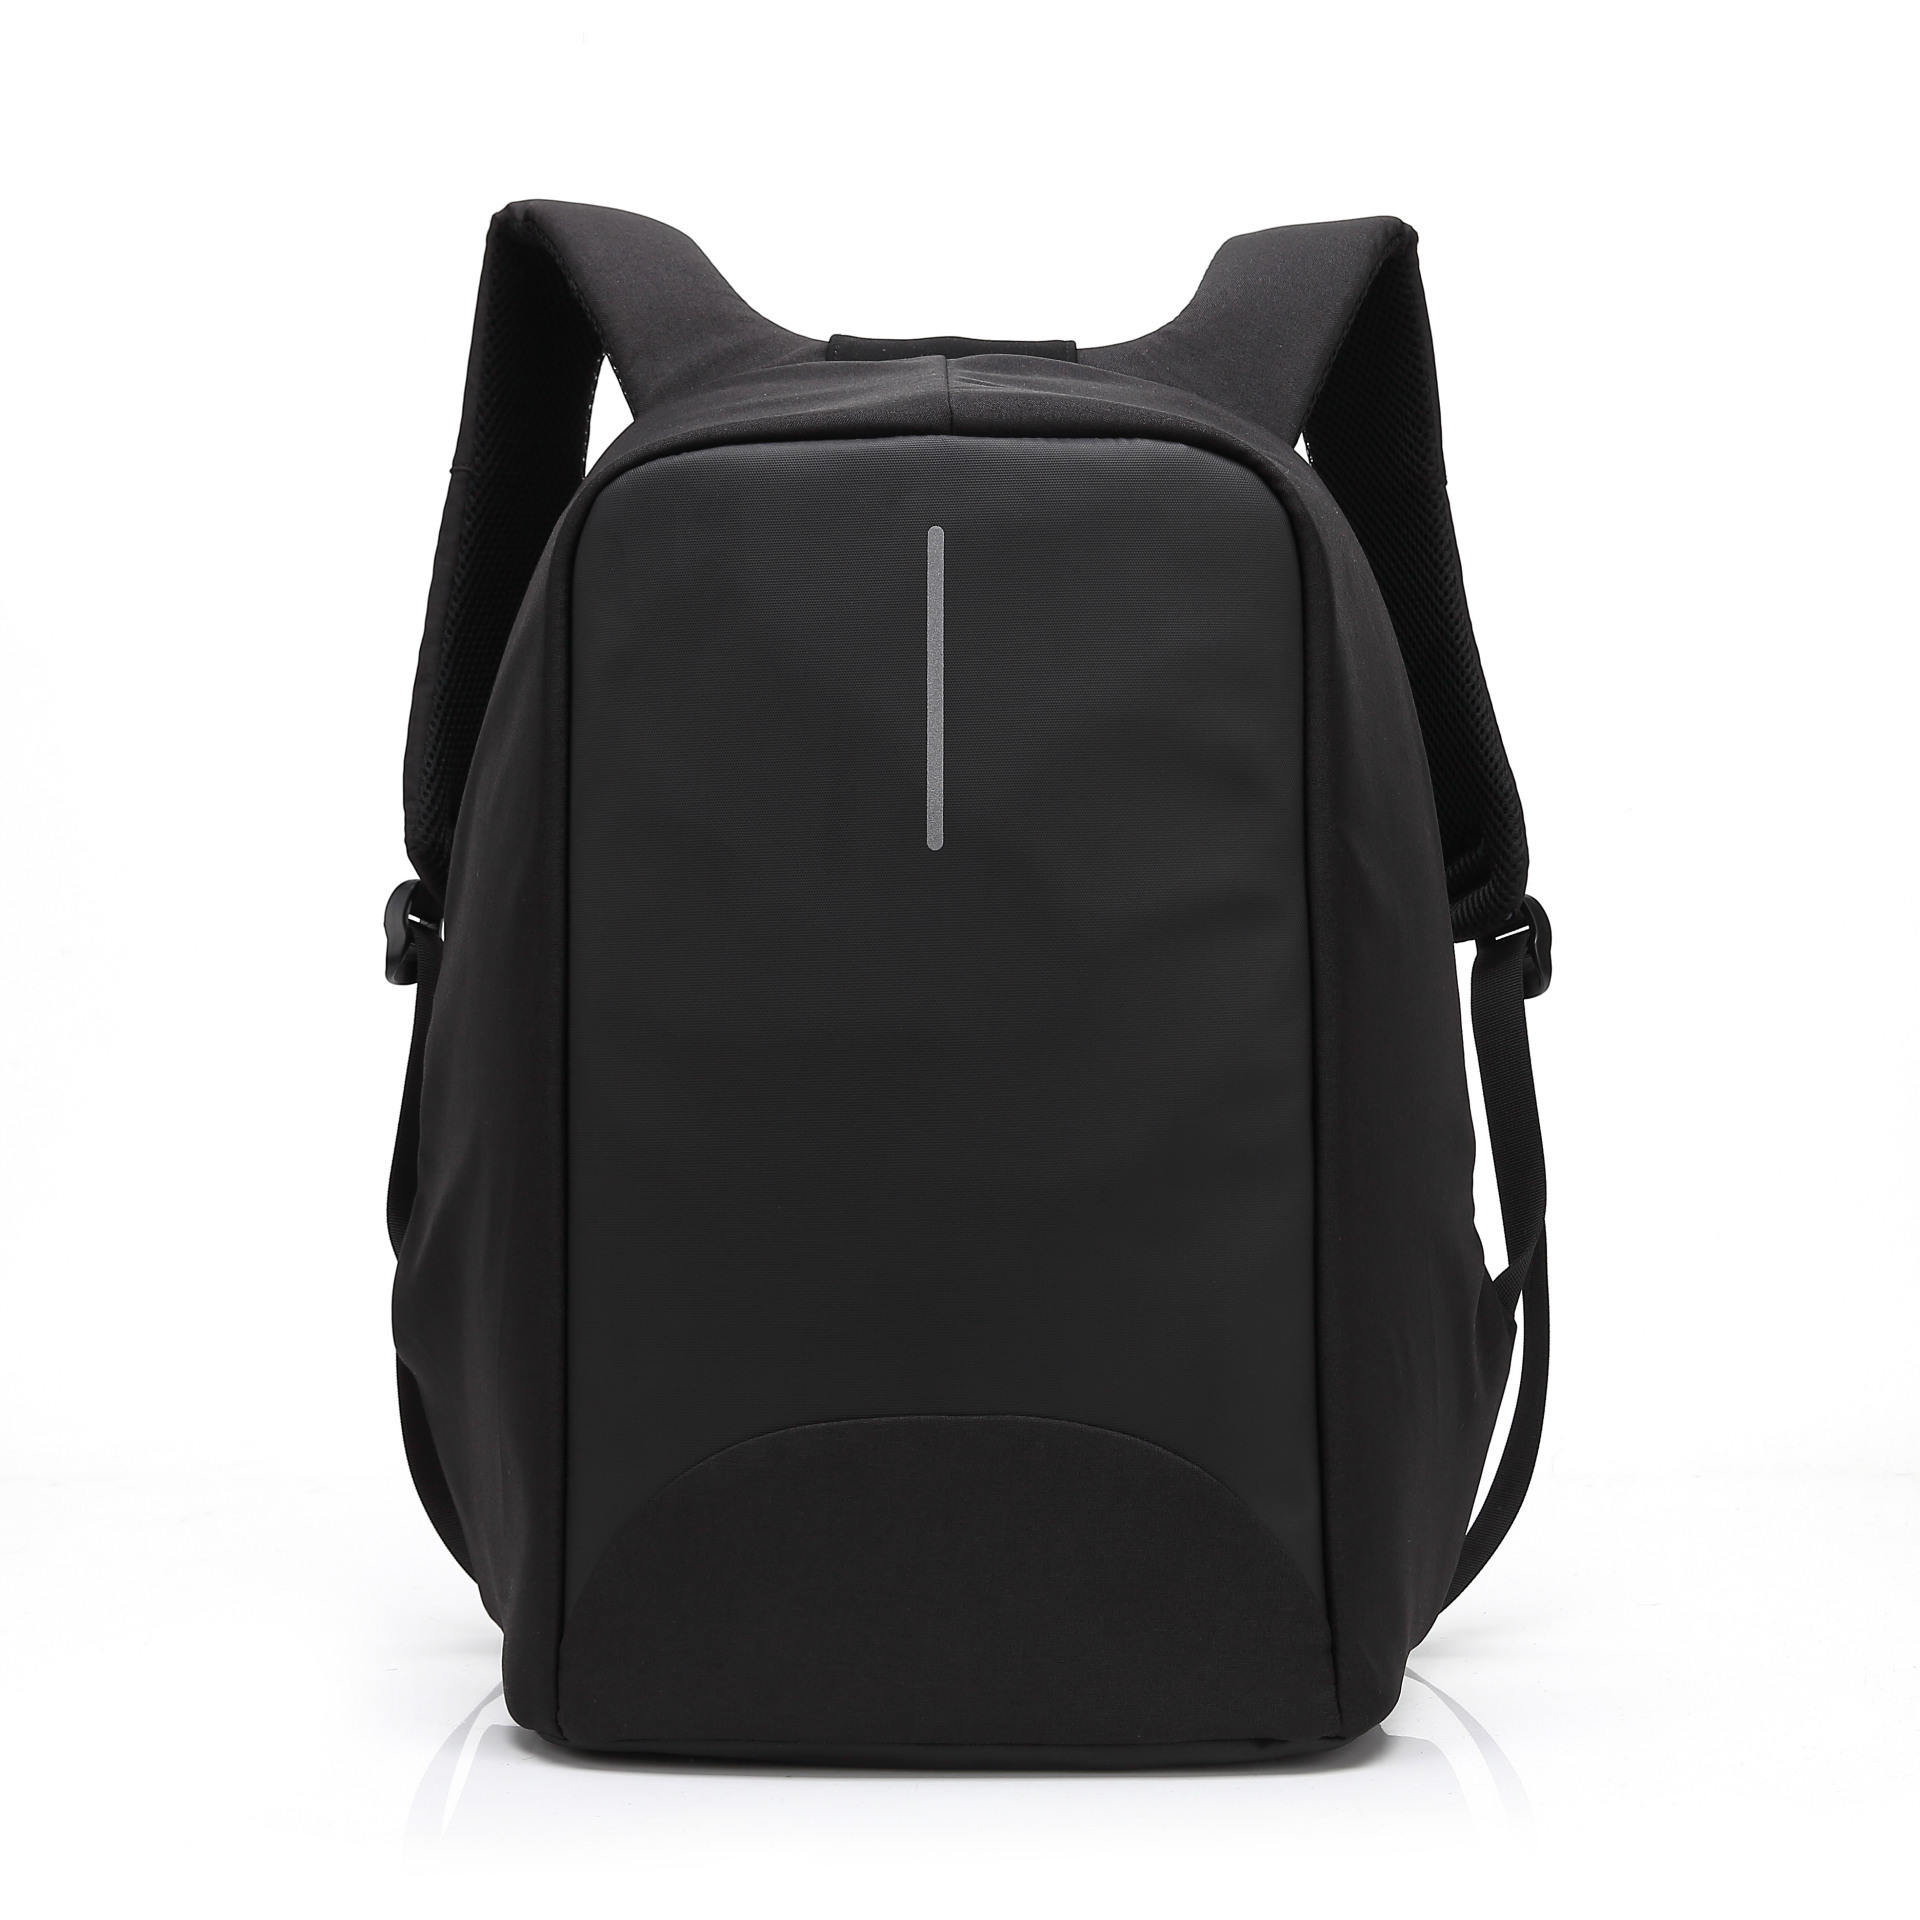 70b97723 9022 4f94 bf1d e824617c11b4 - Men's business anti-theft computer backpack